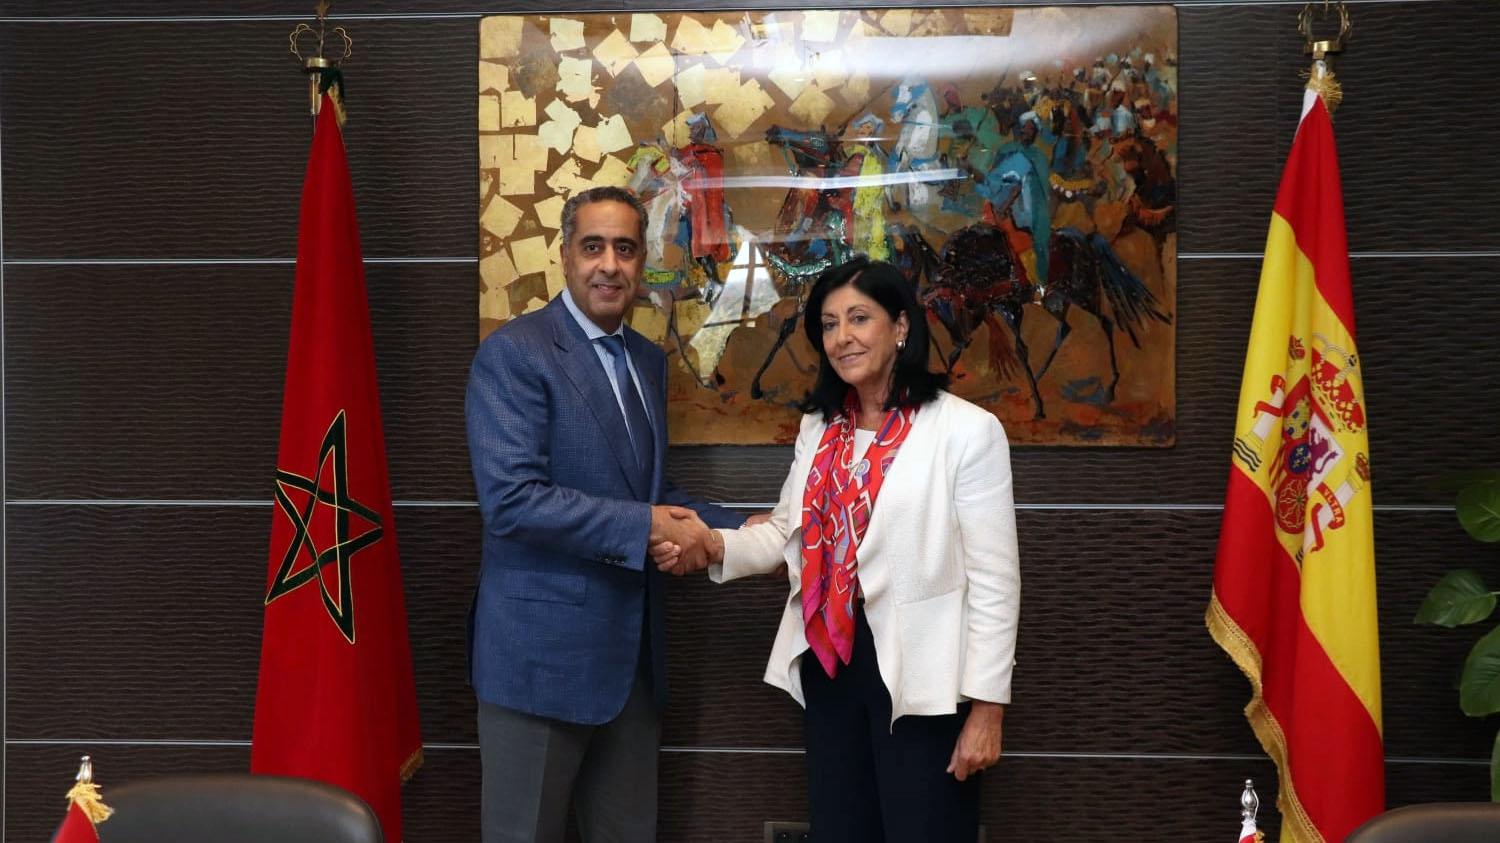 Hammouchi and Llamazares discussed the importance of Moroccan-Spanish cooperation in security and intelligence